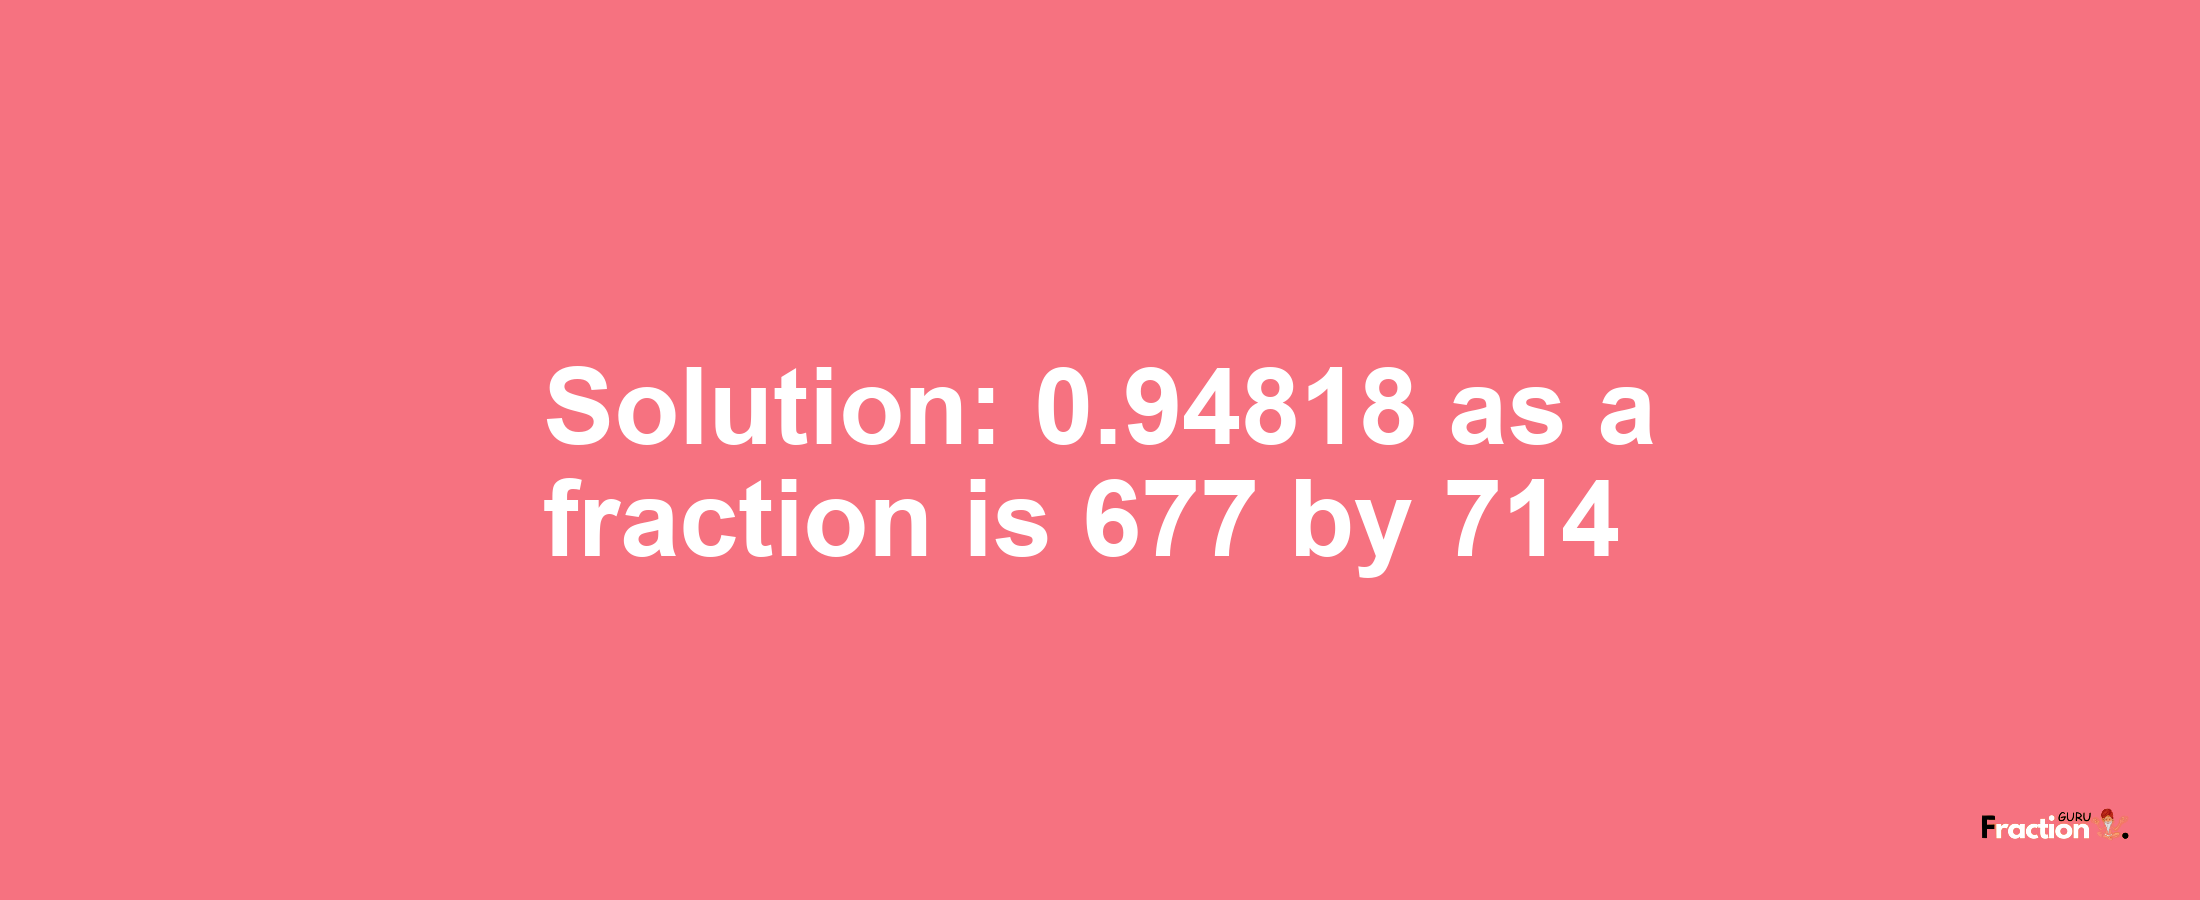 Solution:0.94818 as a fraction is 677/714